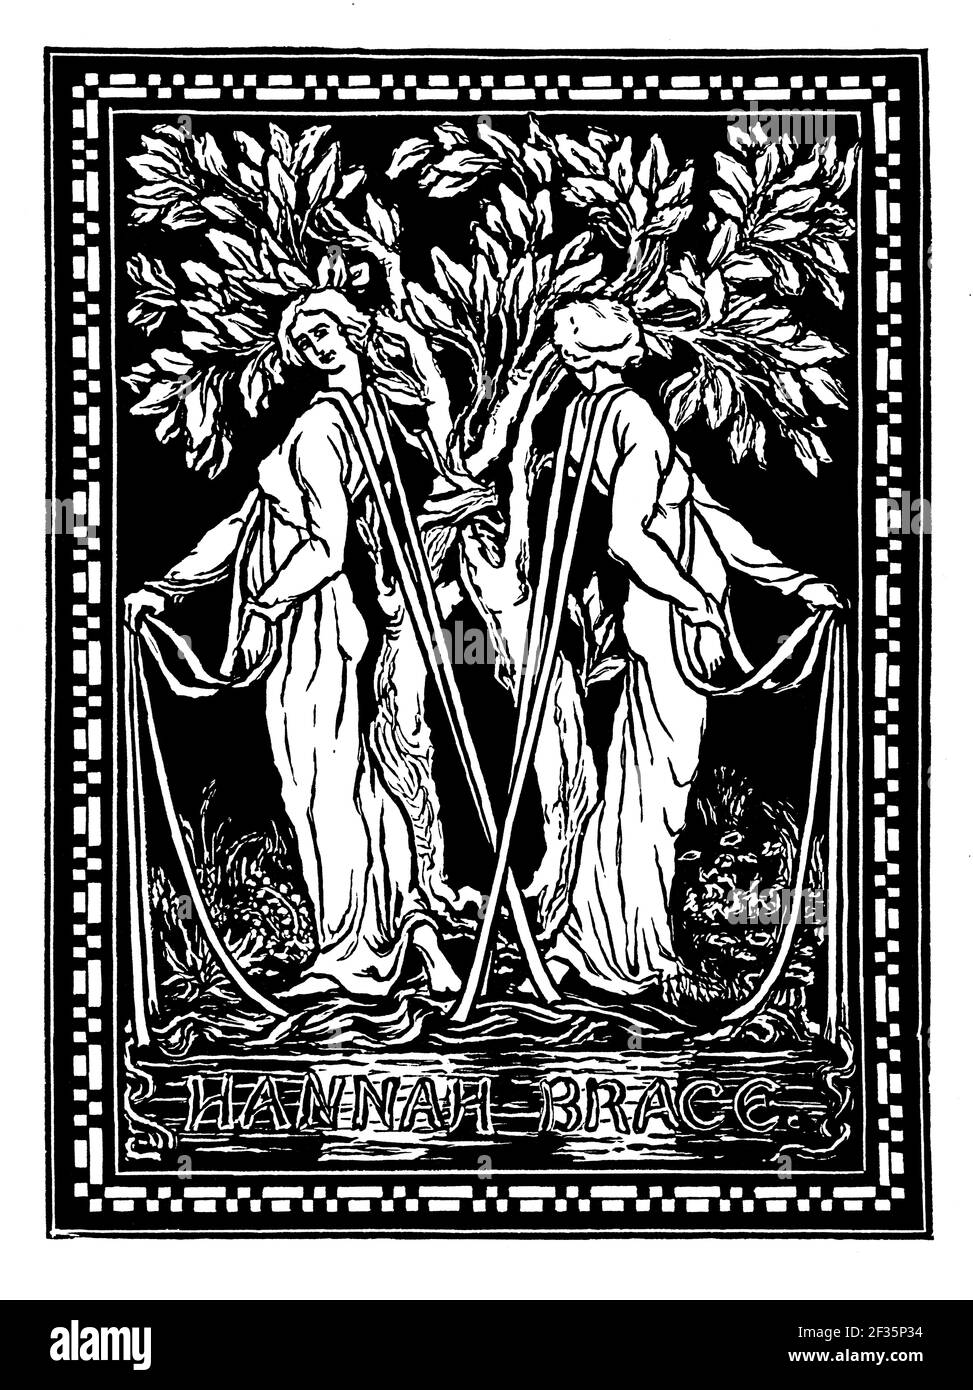 two female figures reflected in water woodcut bookplate, designed for Hannah Brace by writer and illustrator Laurence Houseman Stock Photo